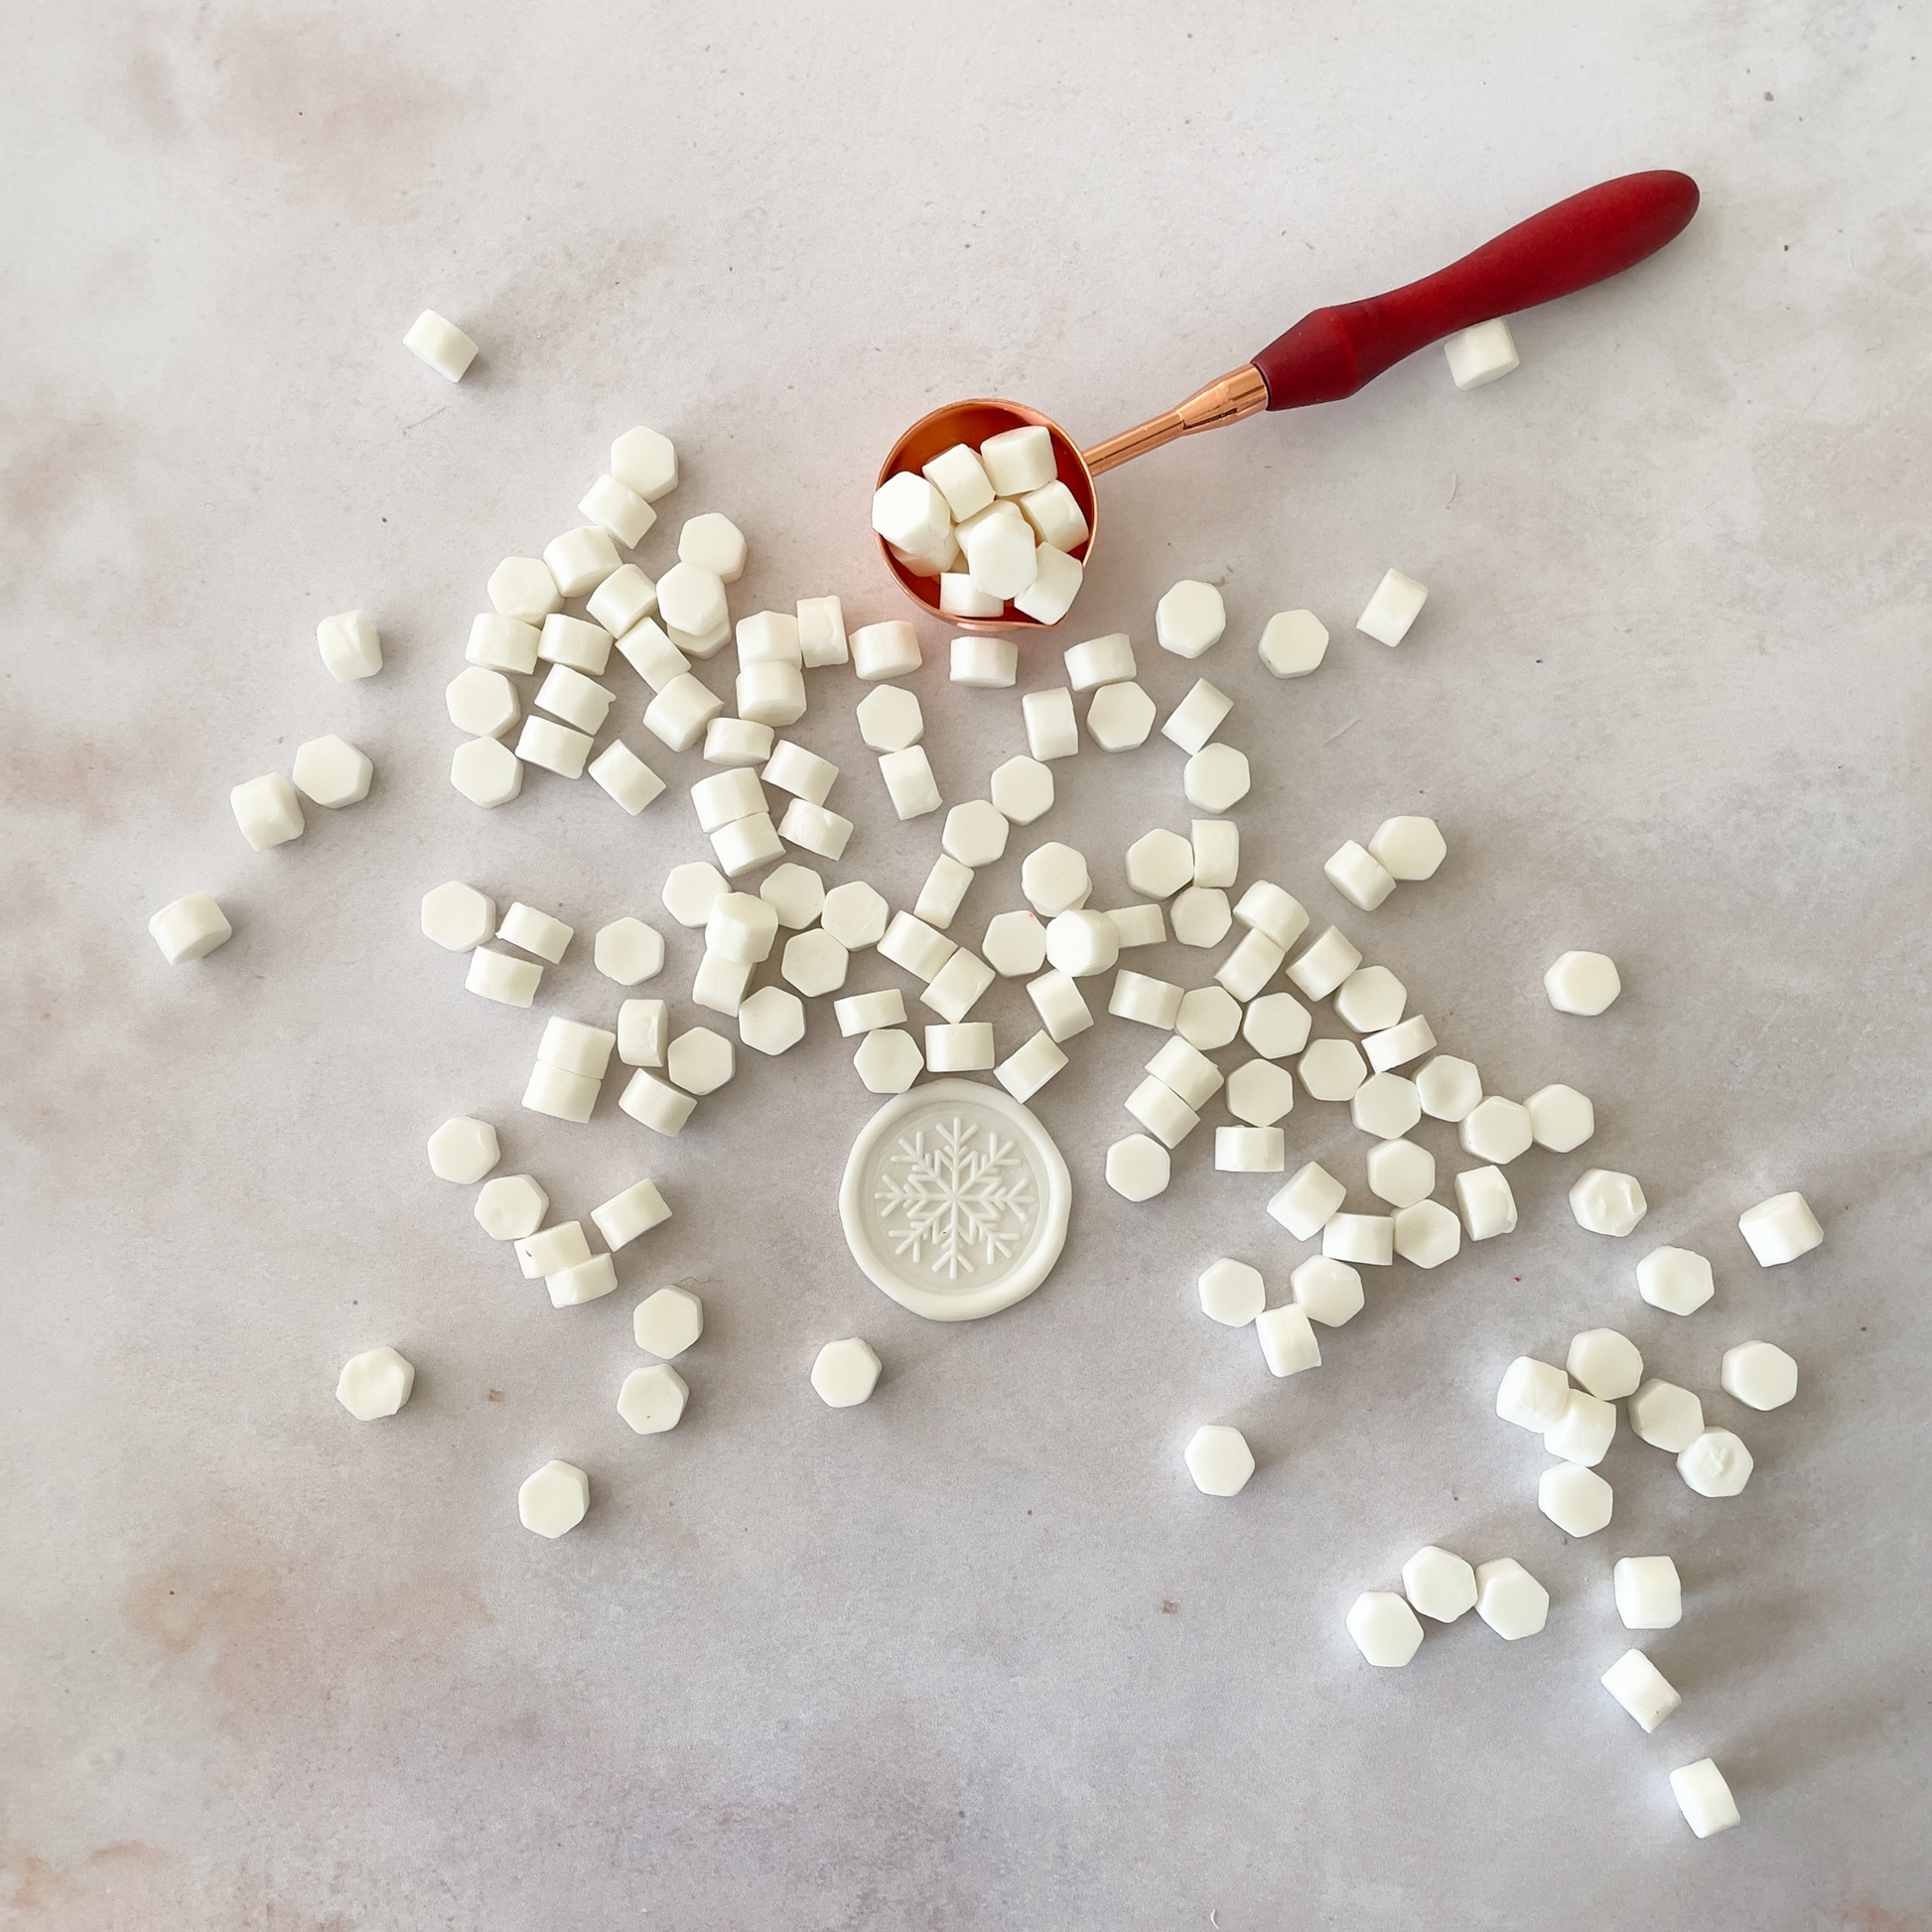 sealing wax beads in white.  Small hexagon beads of wax to make wax stamps and seals in white